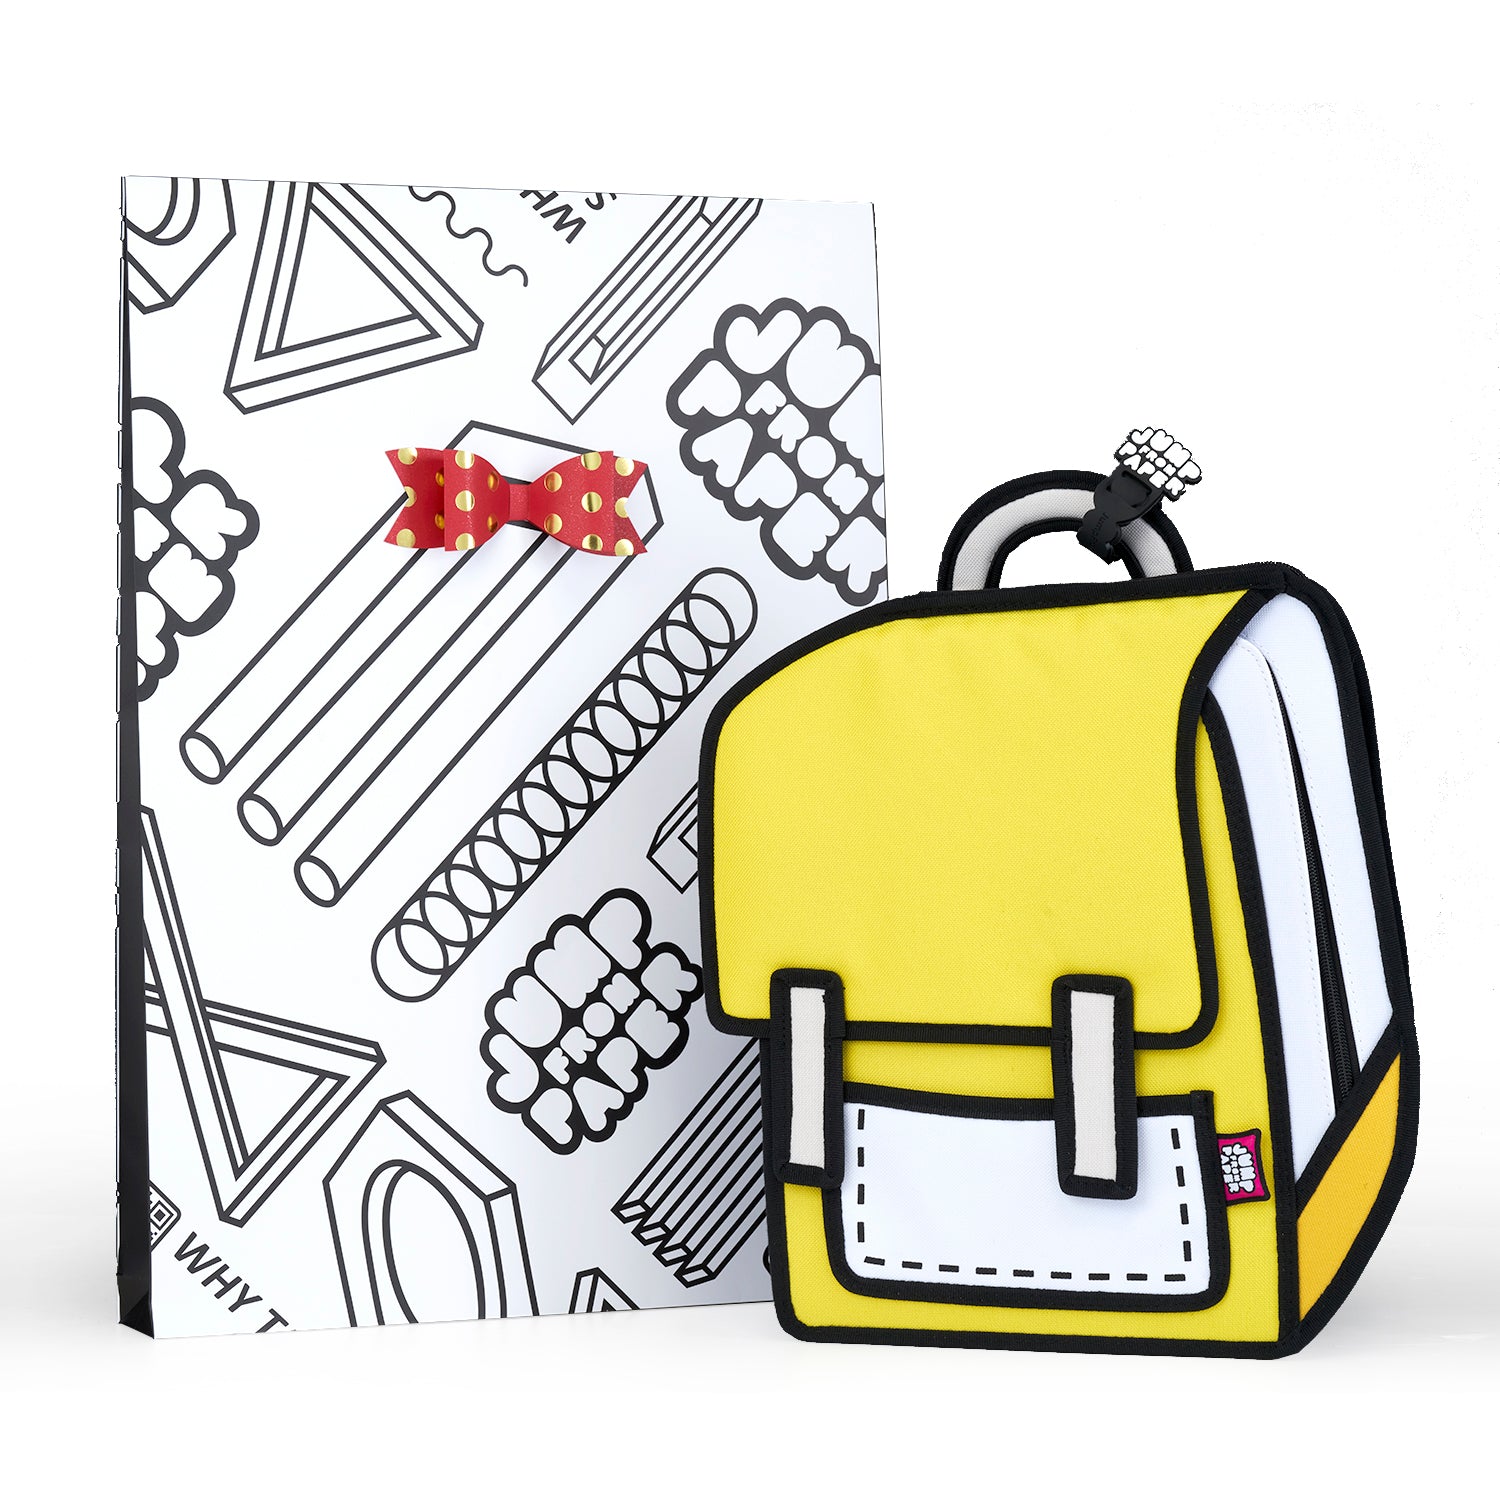 Gift Wrap for Junior True Blue Spaceman Backpack